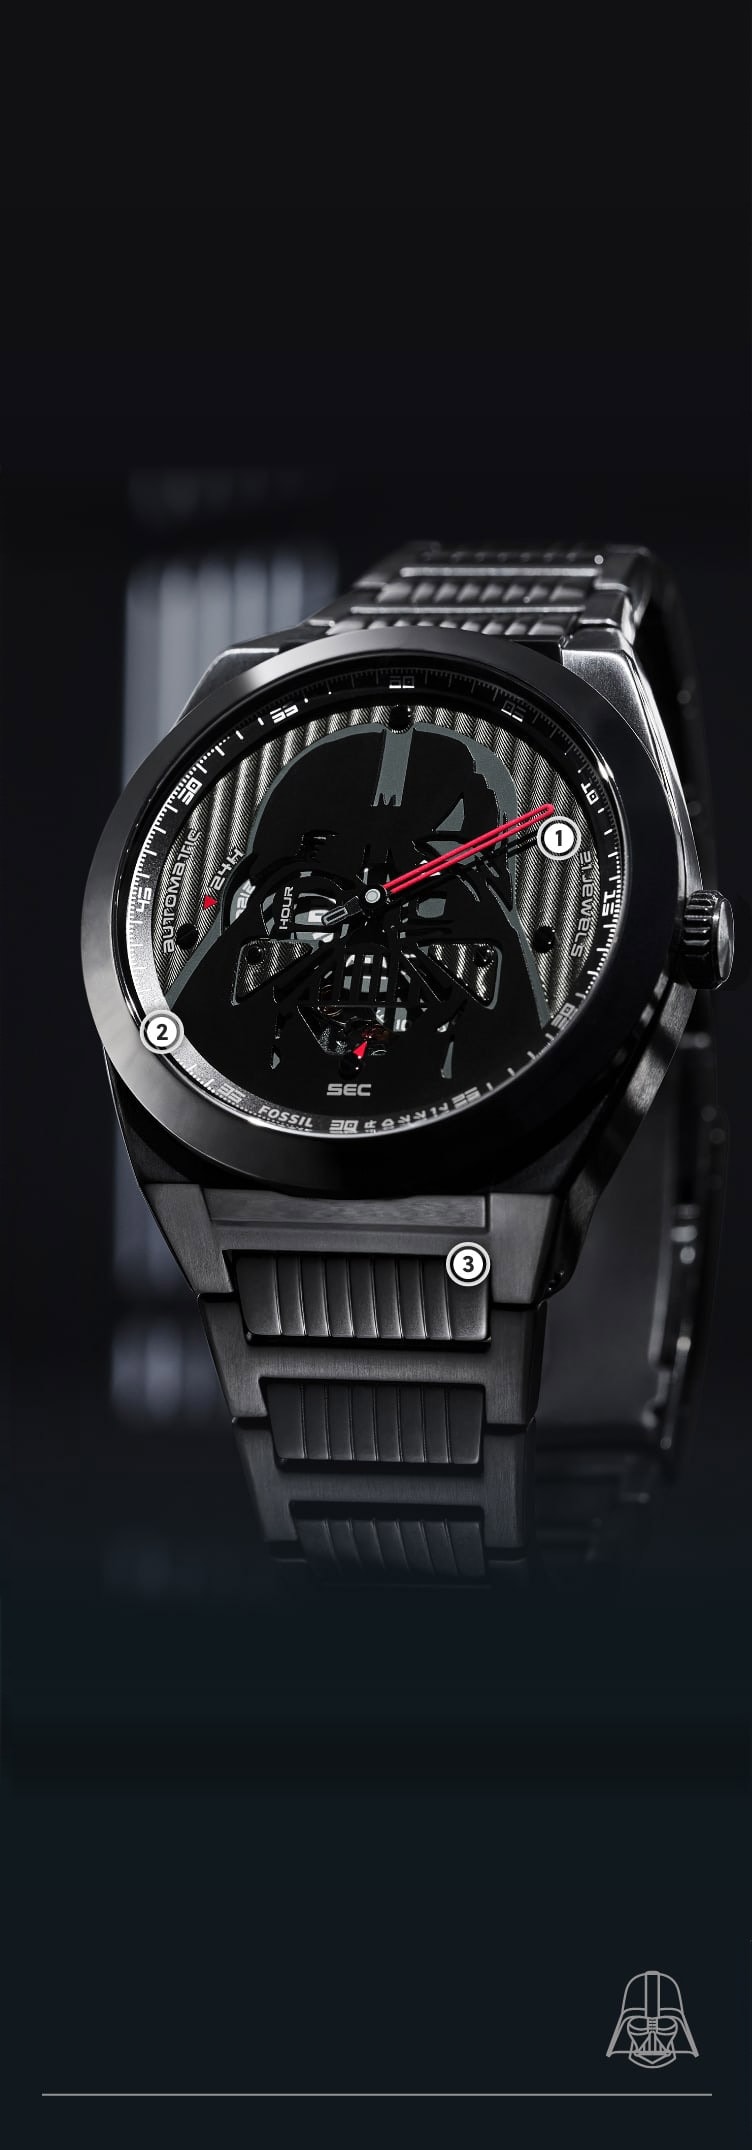 A close up shot of a black watch with a dimensional Darth Vader helmet on a textured black dial.